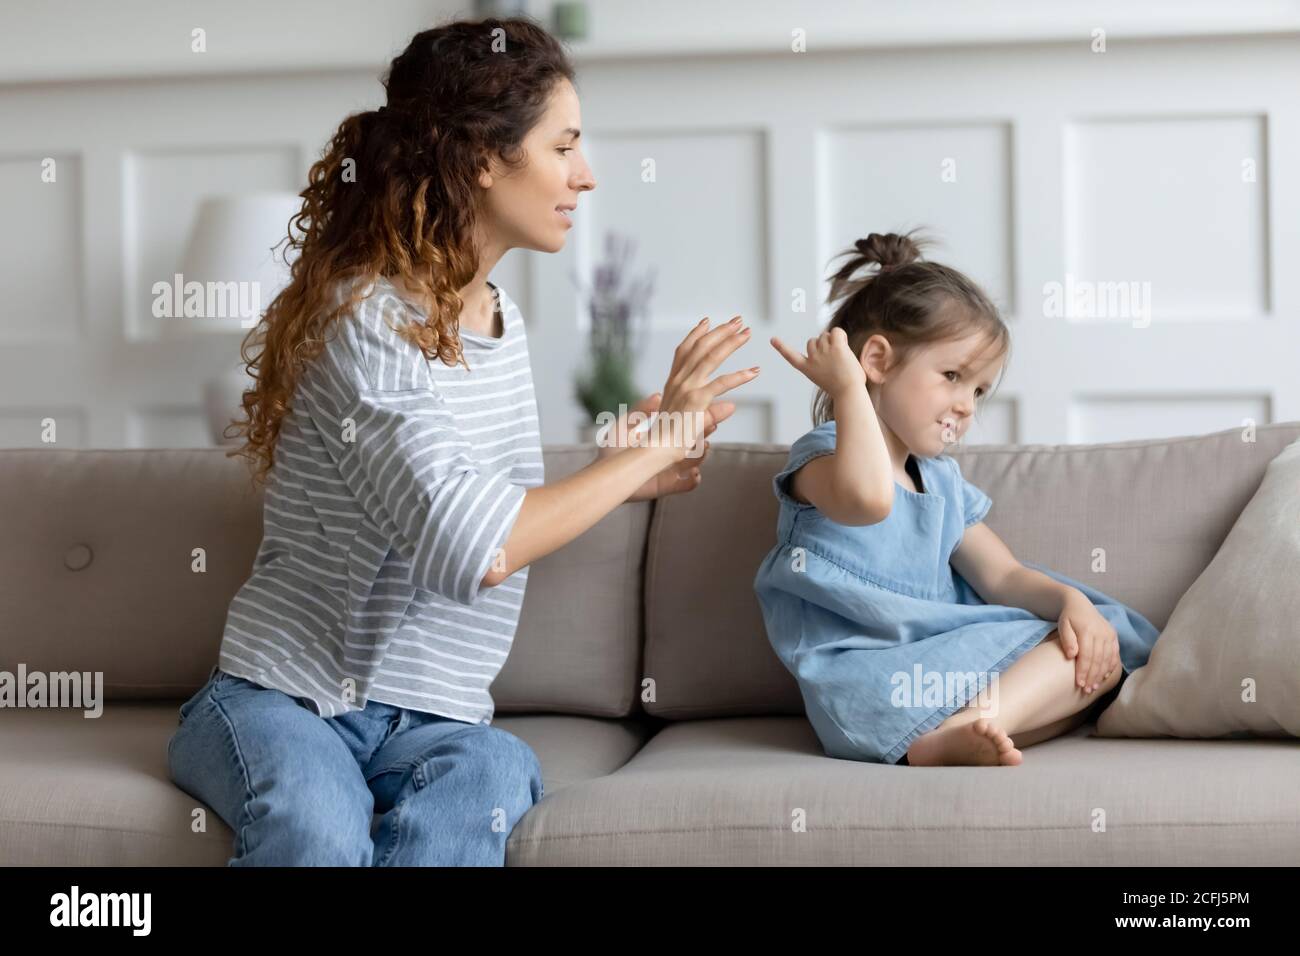 Young mother scolding naughty little misbehave daughter Stock Photo